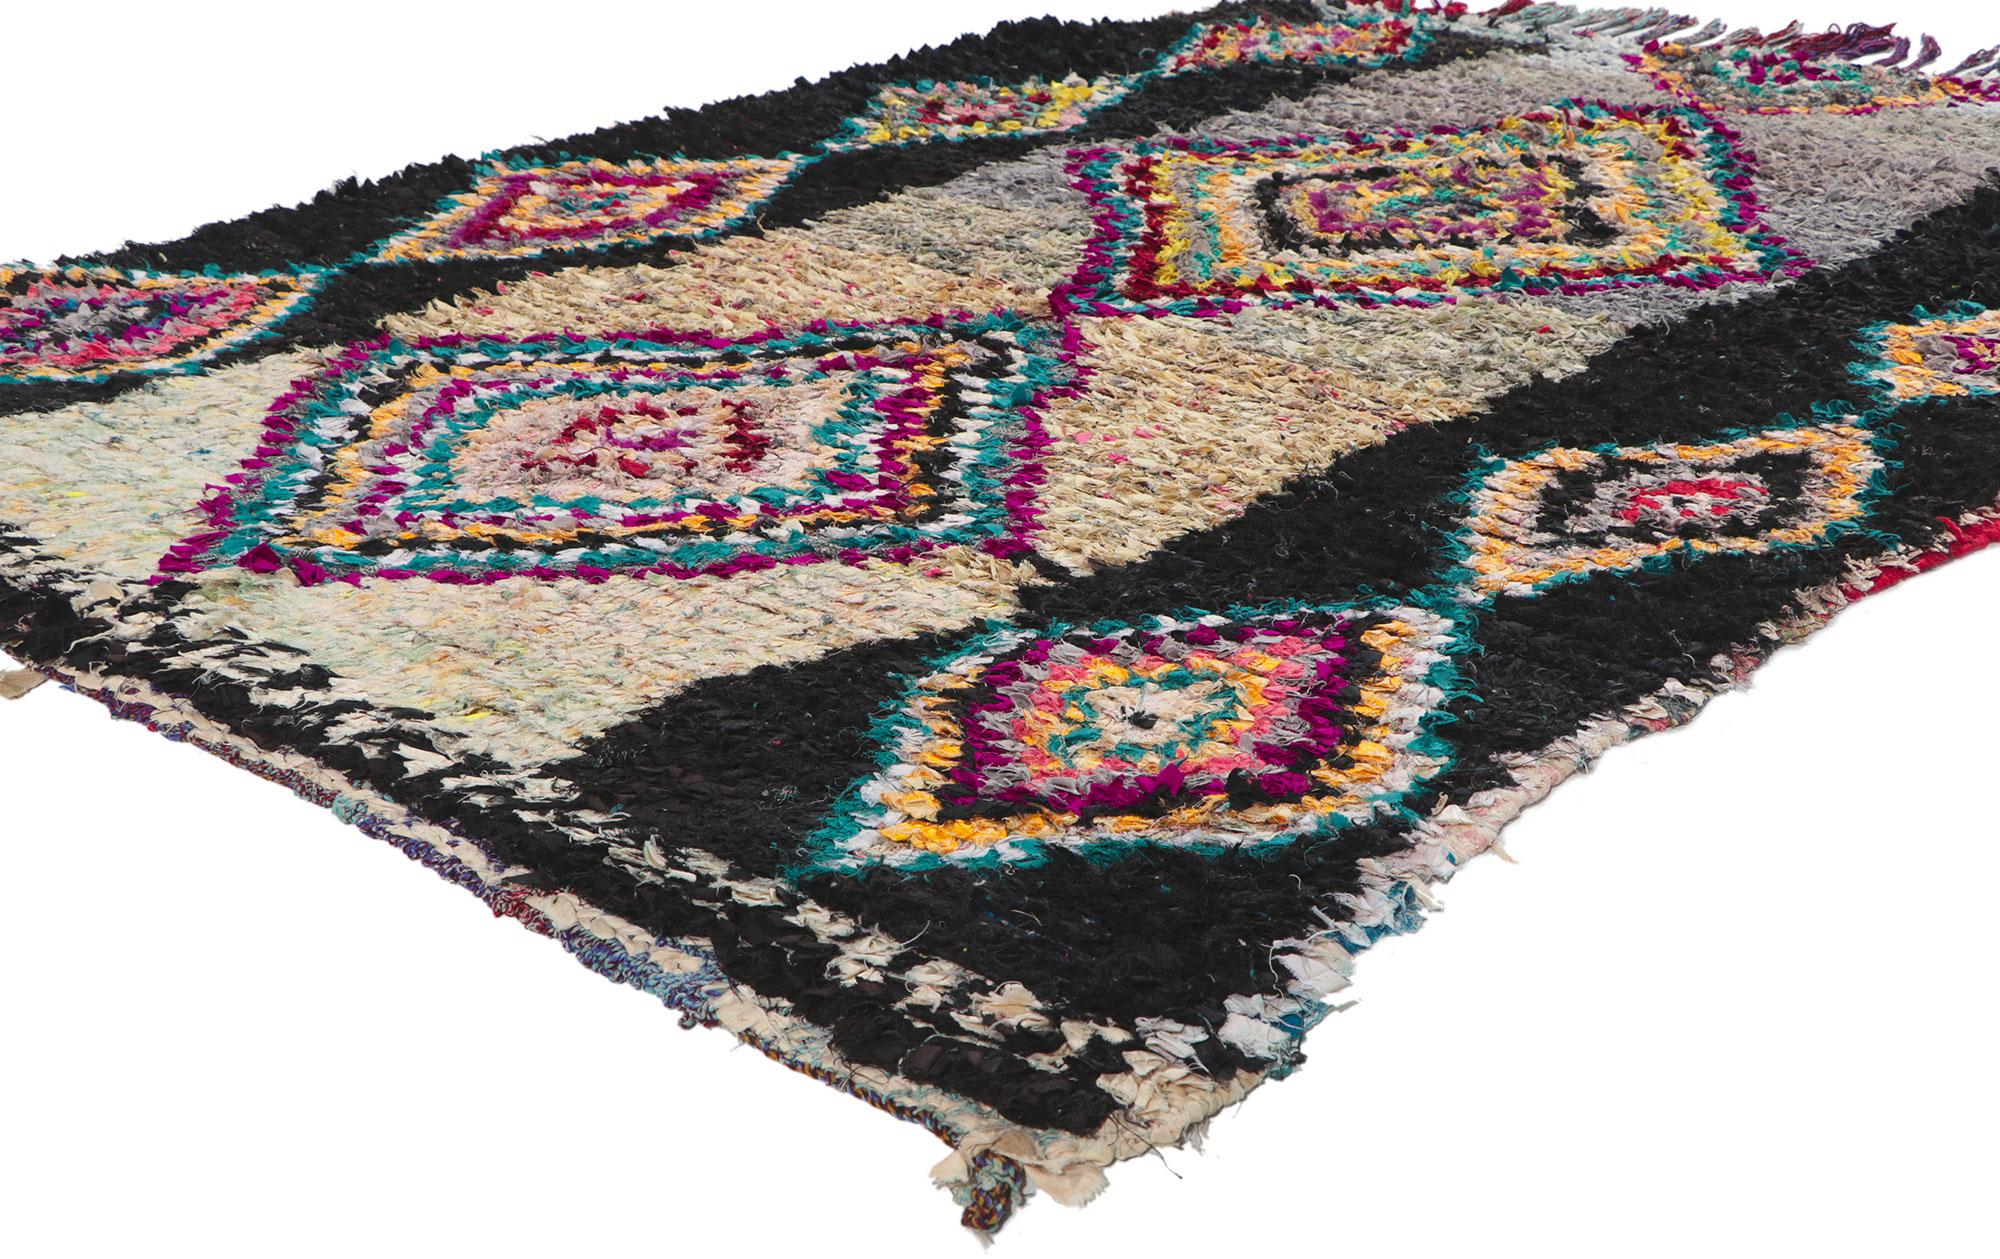 78393 Vintage Moroccan Rag rug, Berber Boucherouite 05'04 x 08'00. ?With its nomadic charm, incredible detail and texture, this hand knotted vintage Moroccan rag rug is a captivating vision of woven beauty. The eye-catching diamond pattern and